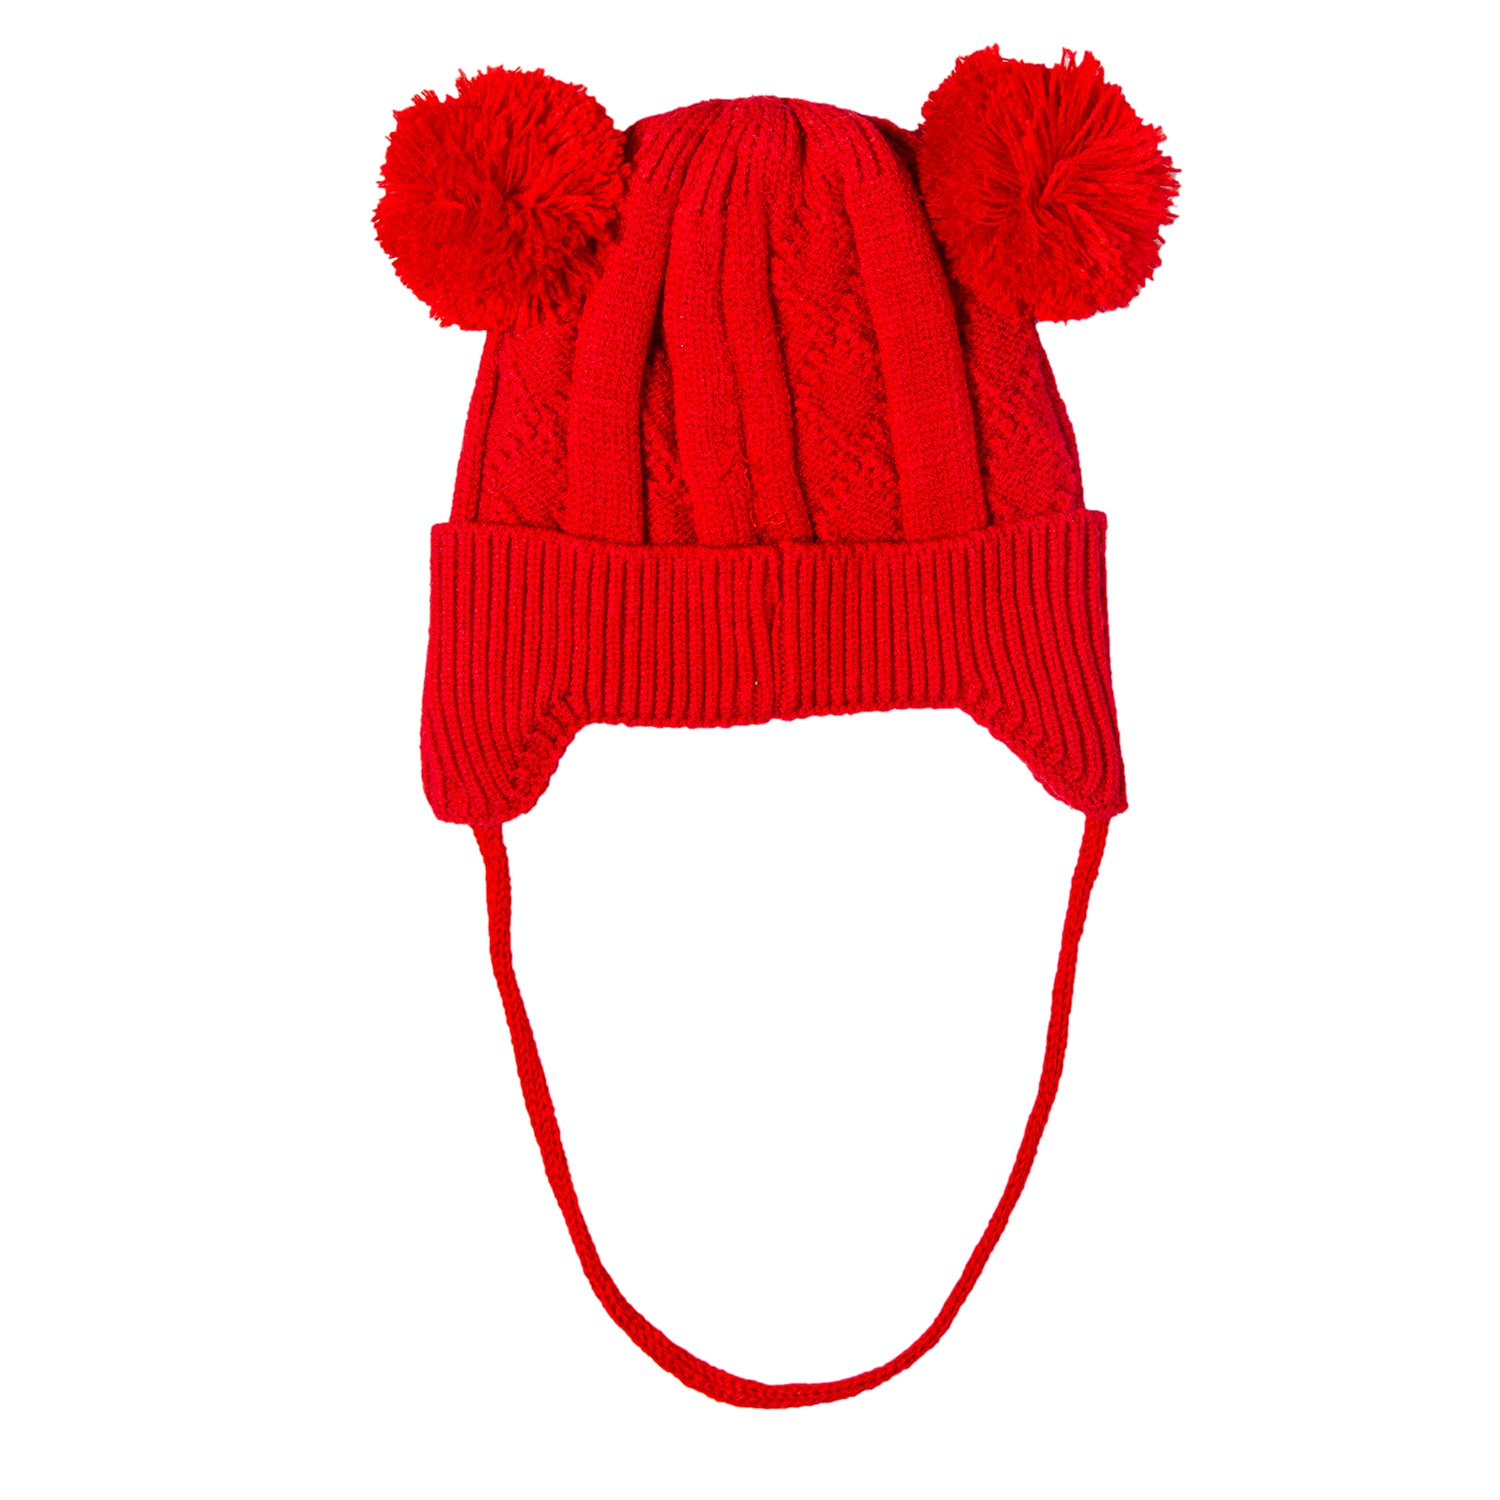 Knit Woollen Cap With Tie For Ear Cover Starry Pom Pom Red - Baby Moo